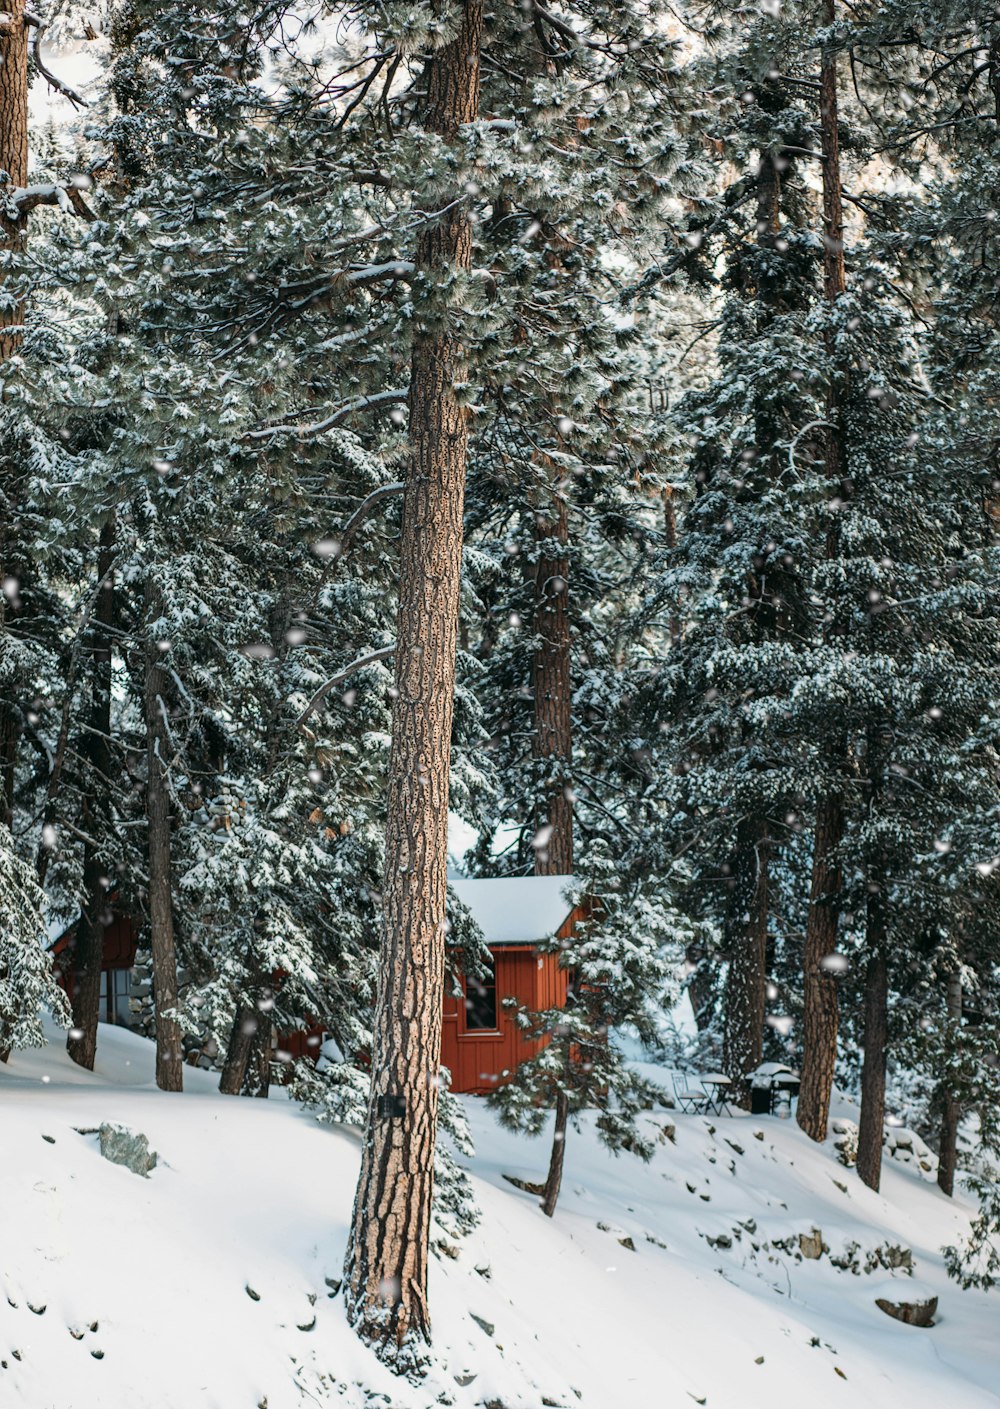 a cabin nestled in the trees in the snow